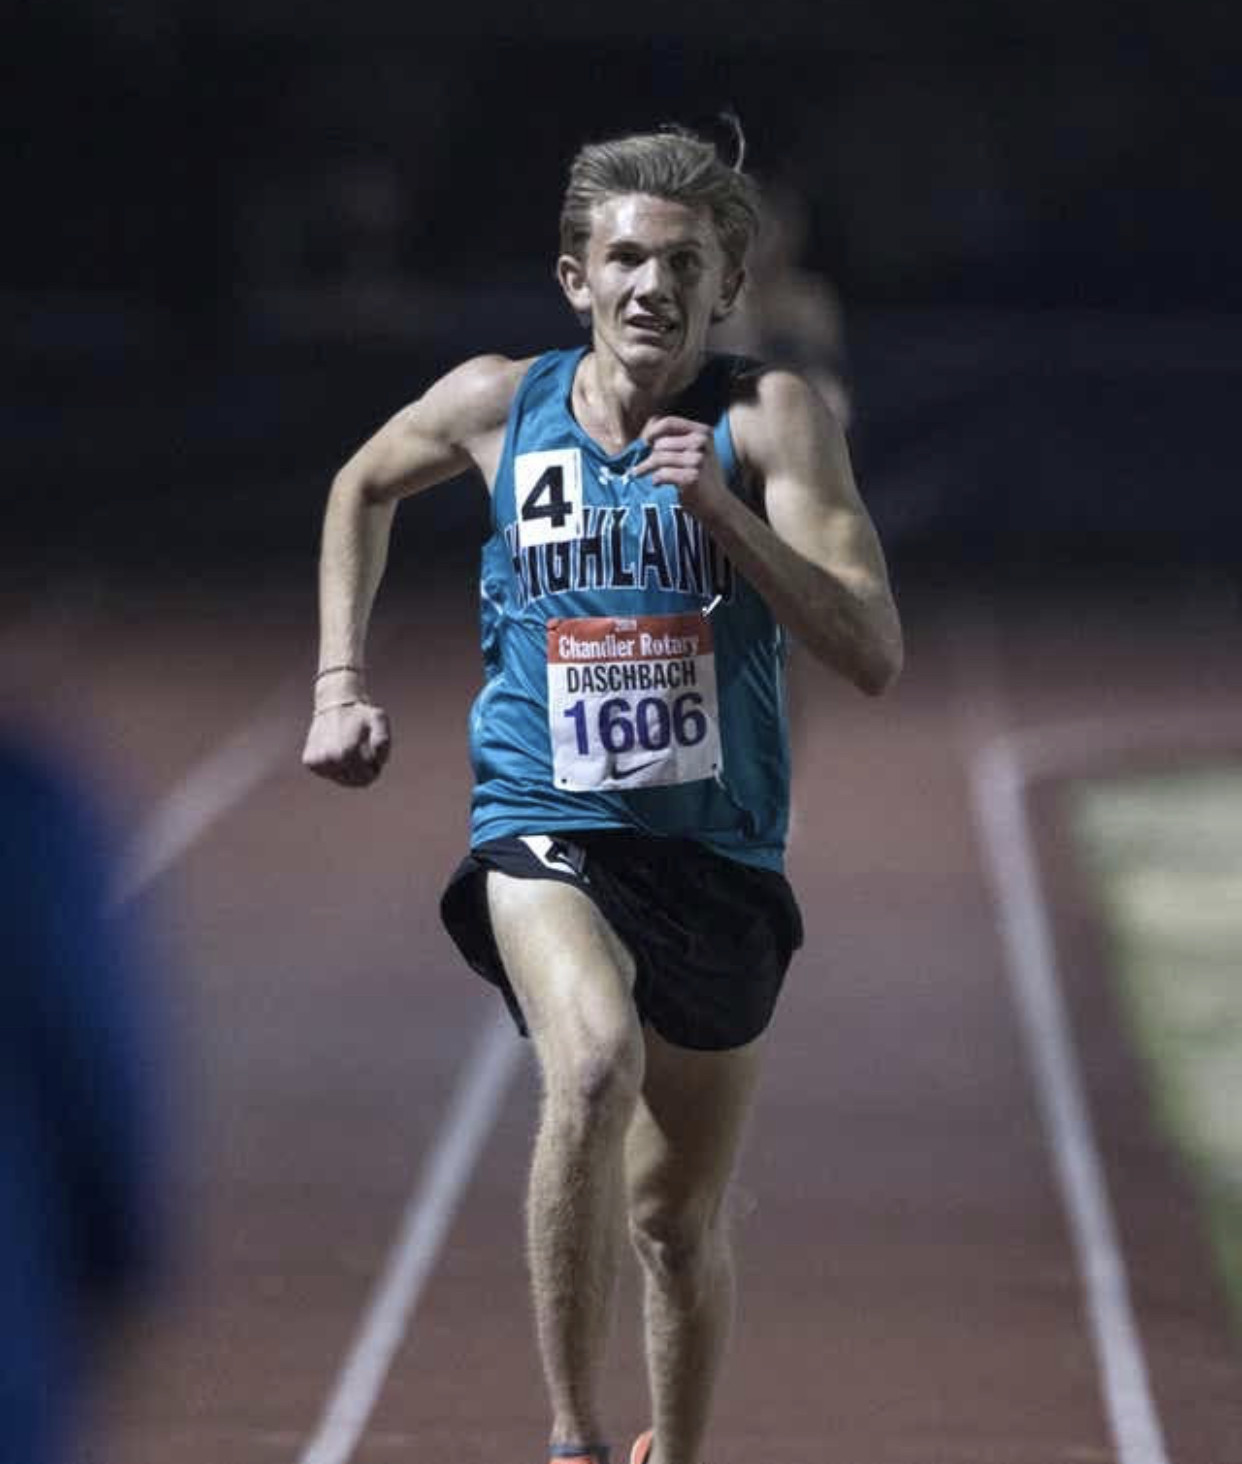 Leo Daschbach Ran a sub four minute mile Saturday night to join the HS list of just 11 who have done it 